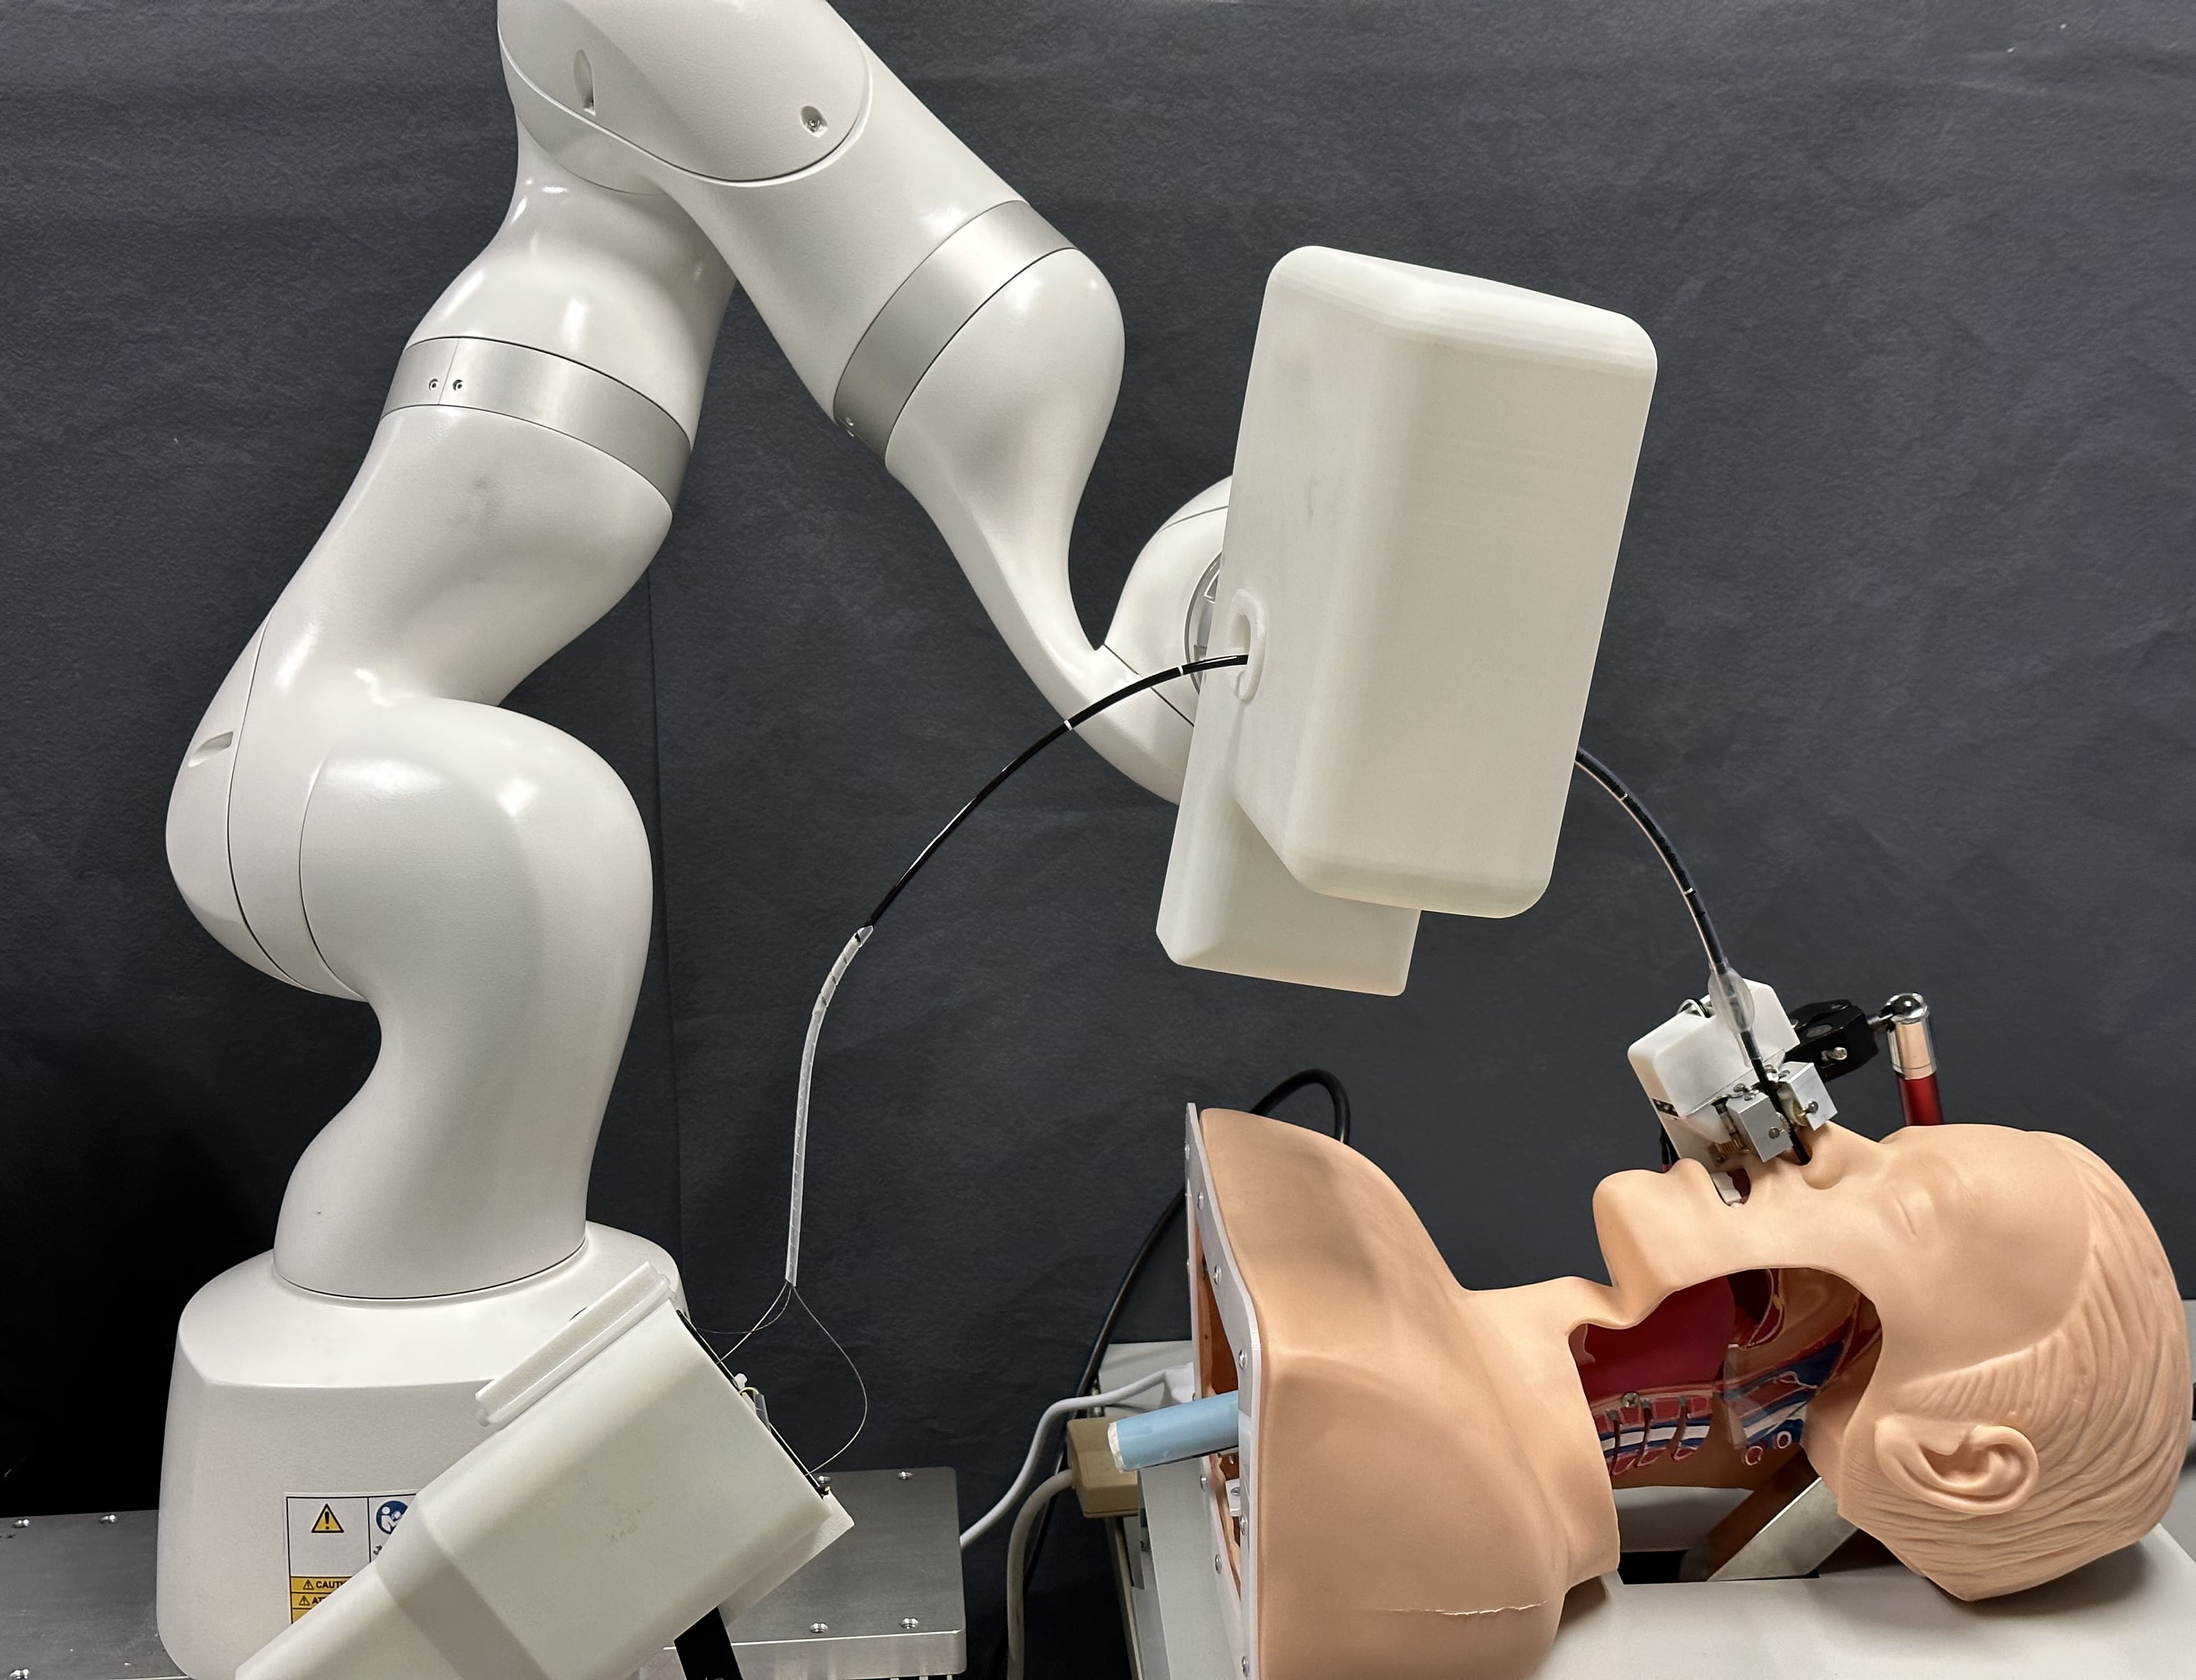 A Vision-Guided Nasotracheal Intubation Robot